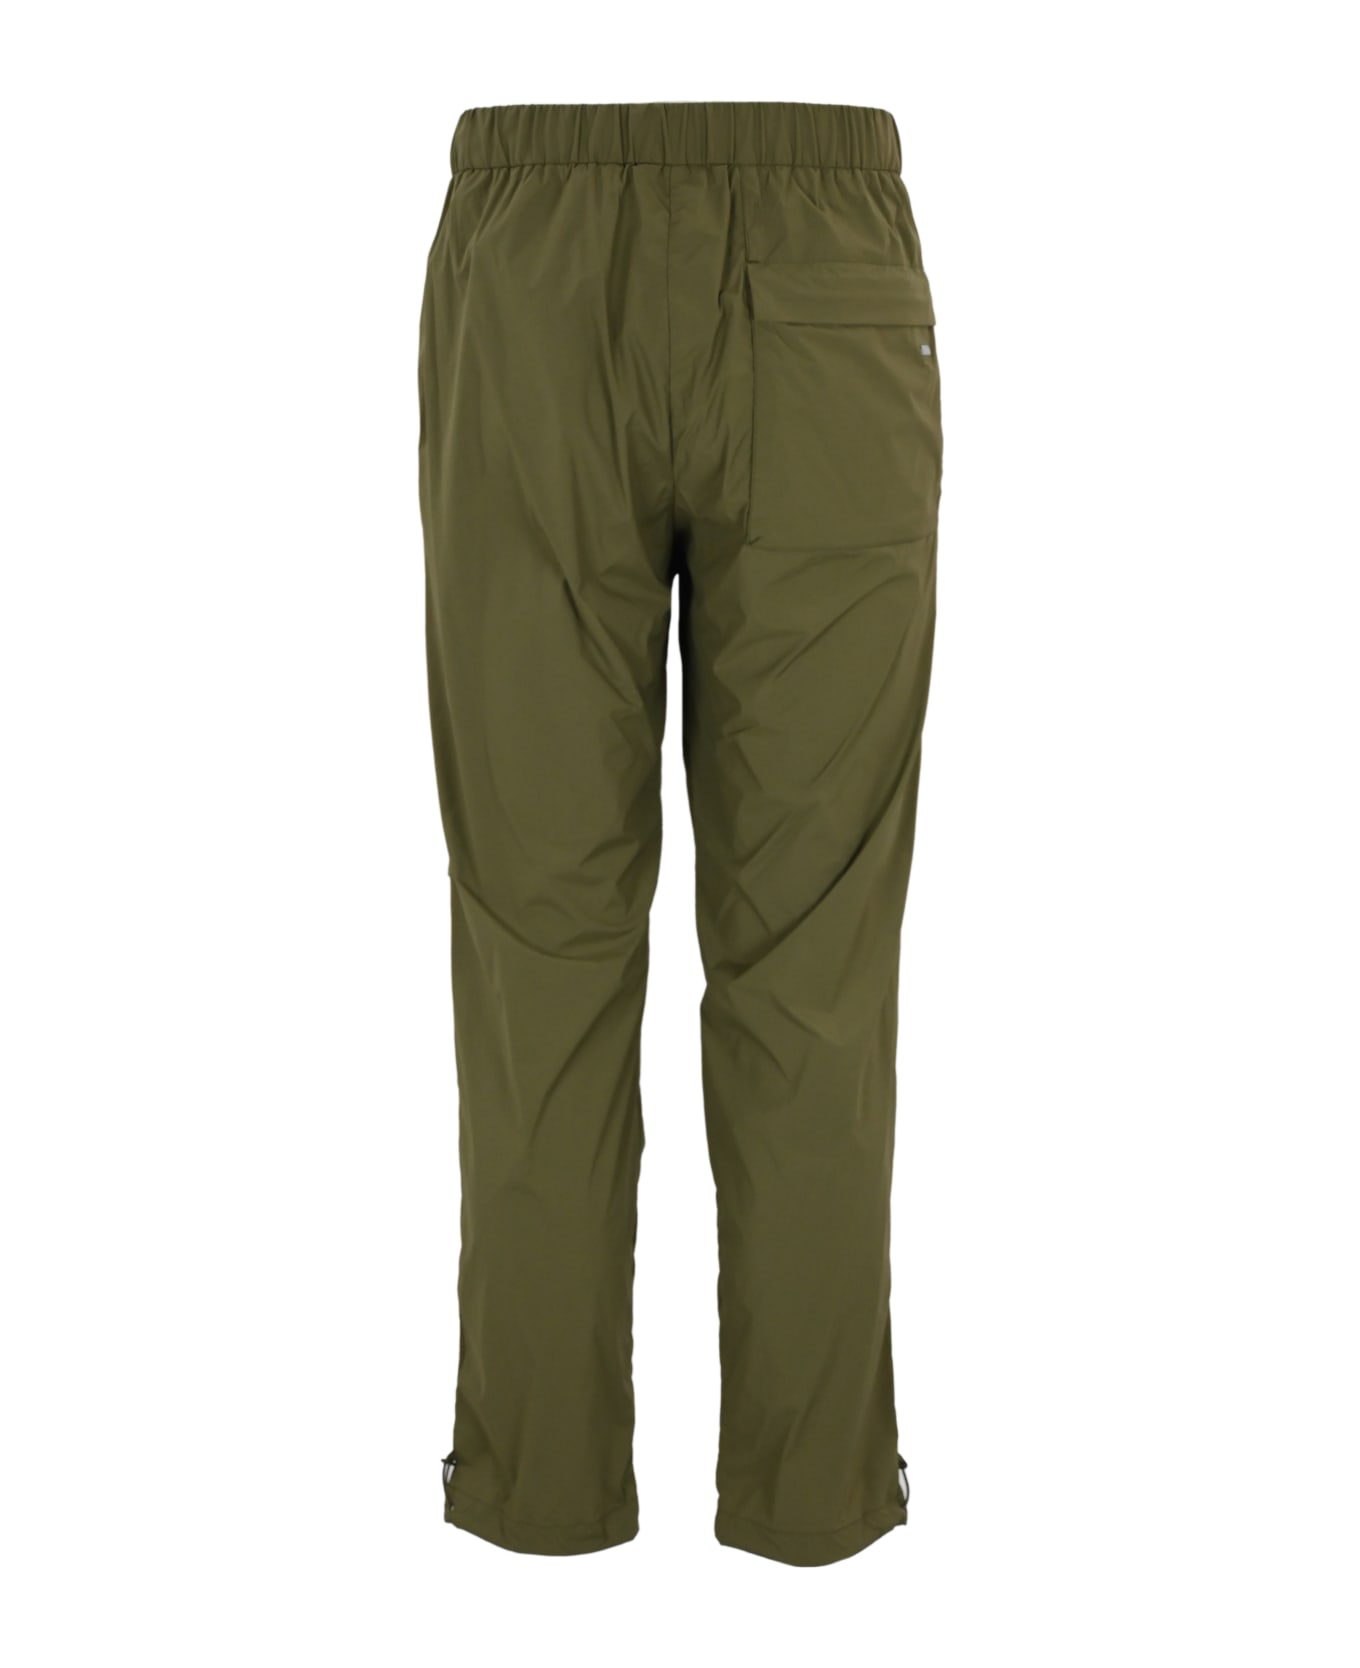 Herno Stretch Nylon Trousers - Light military ボトムス